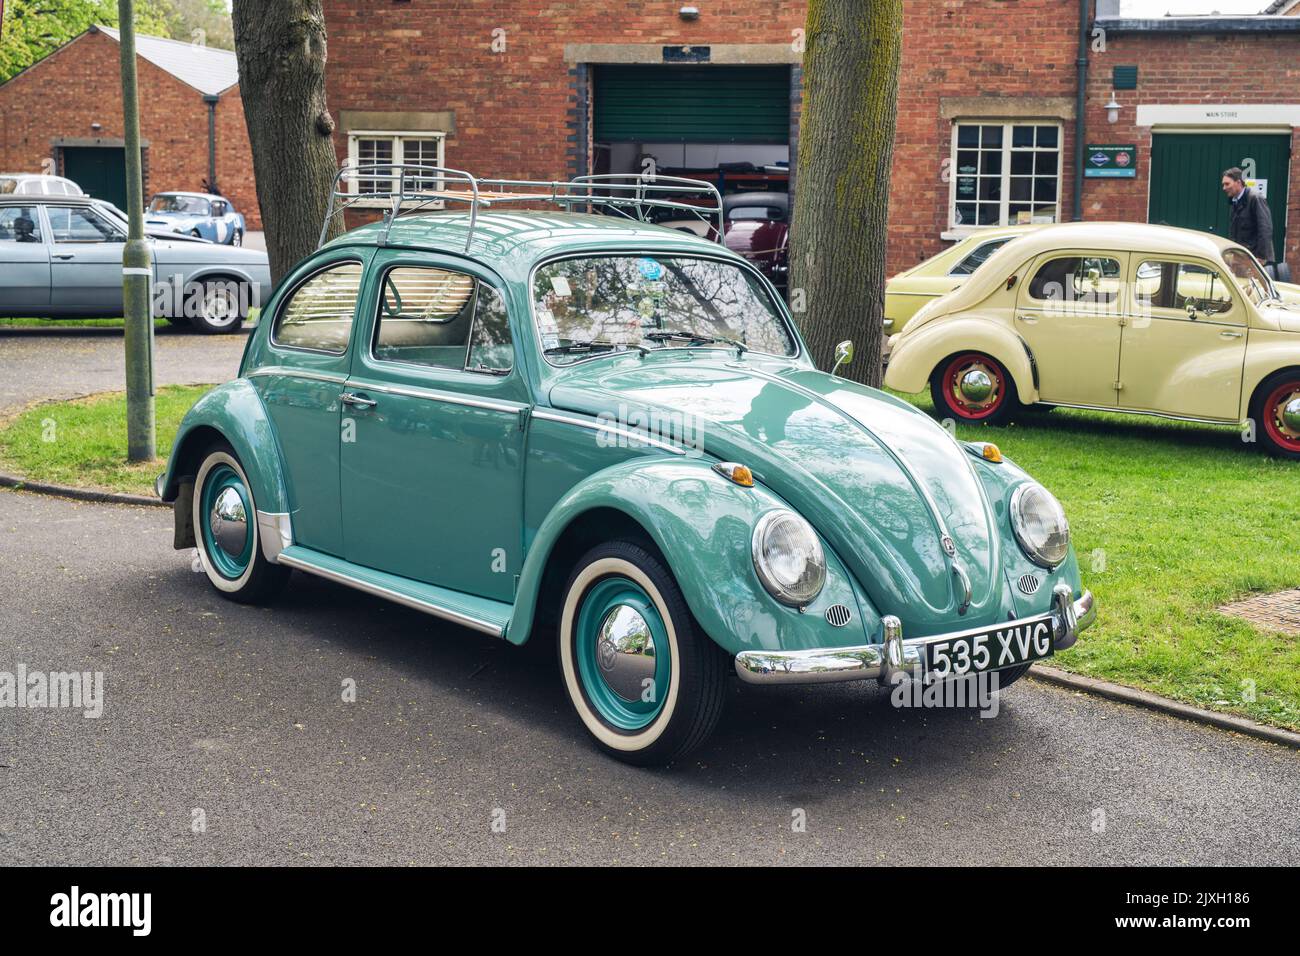 1960 Volkswagen Beetle at Bicester heritage centre spring sunday scramble event. Bicester, Oxfordshire, England Stock Photo